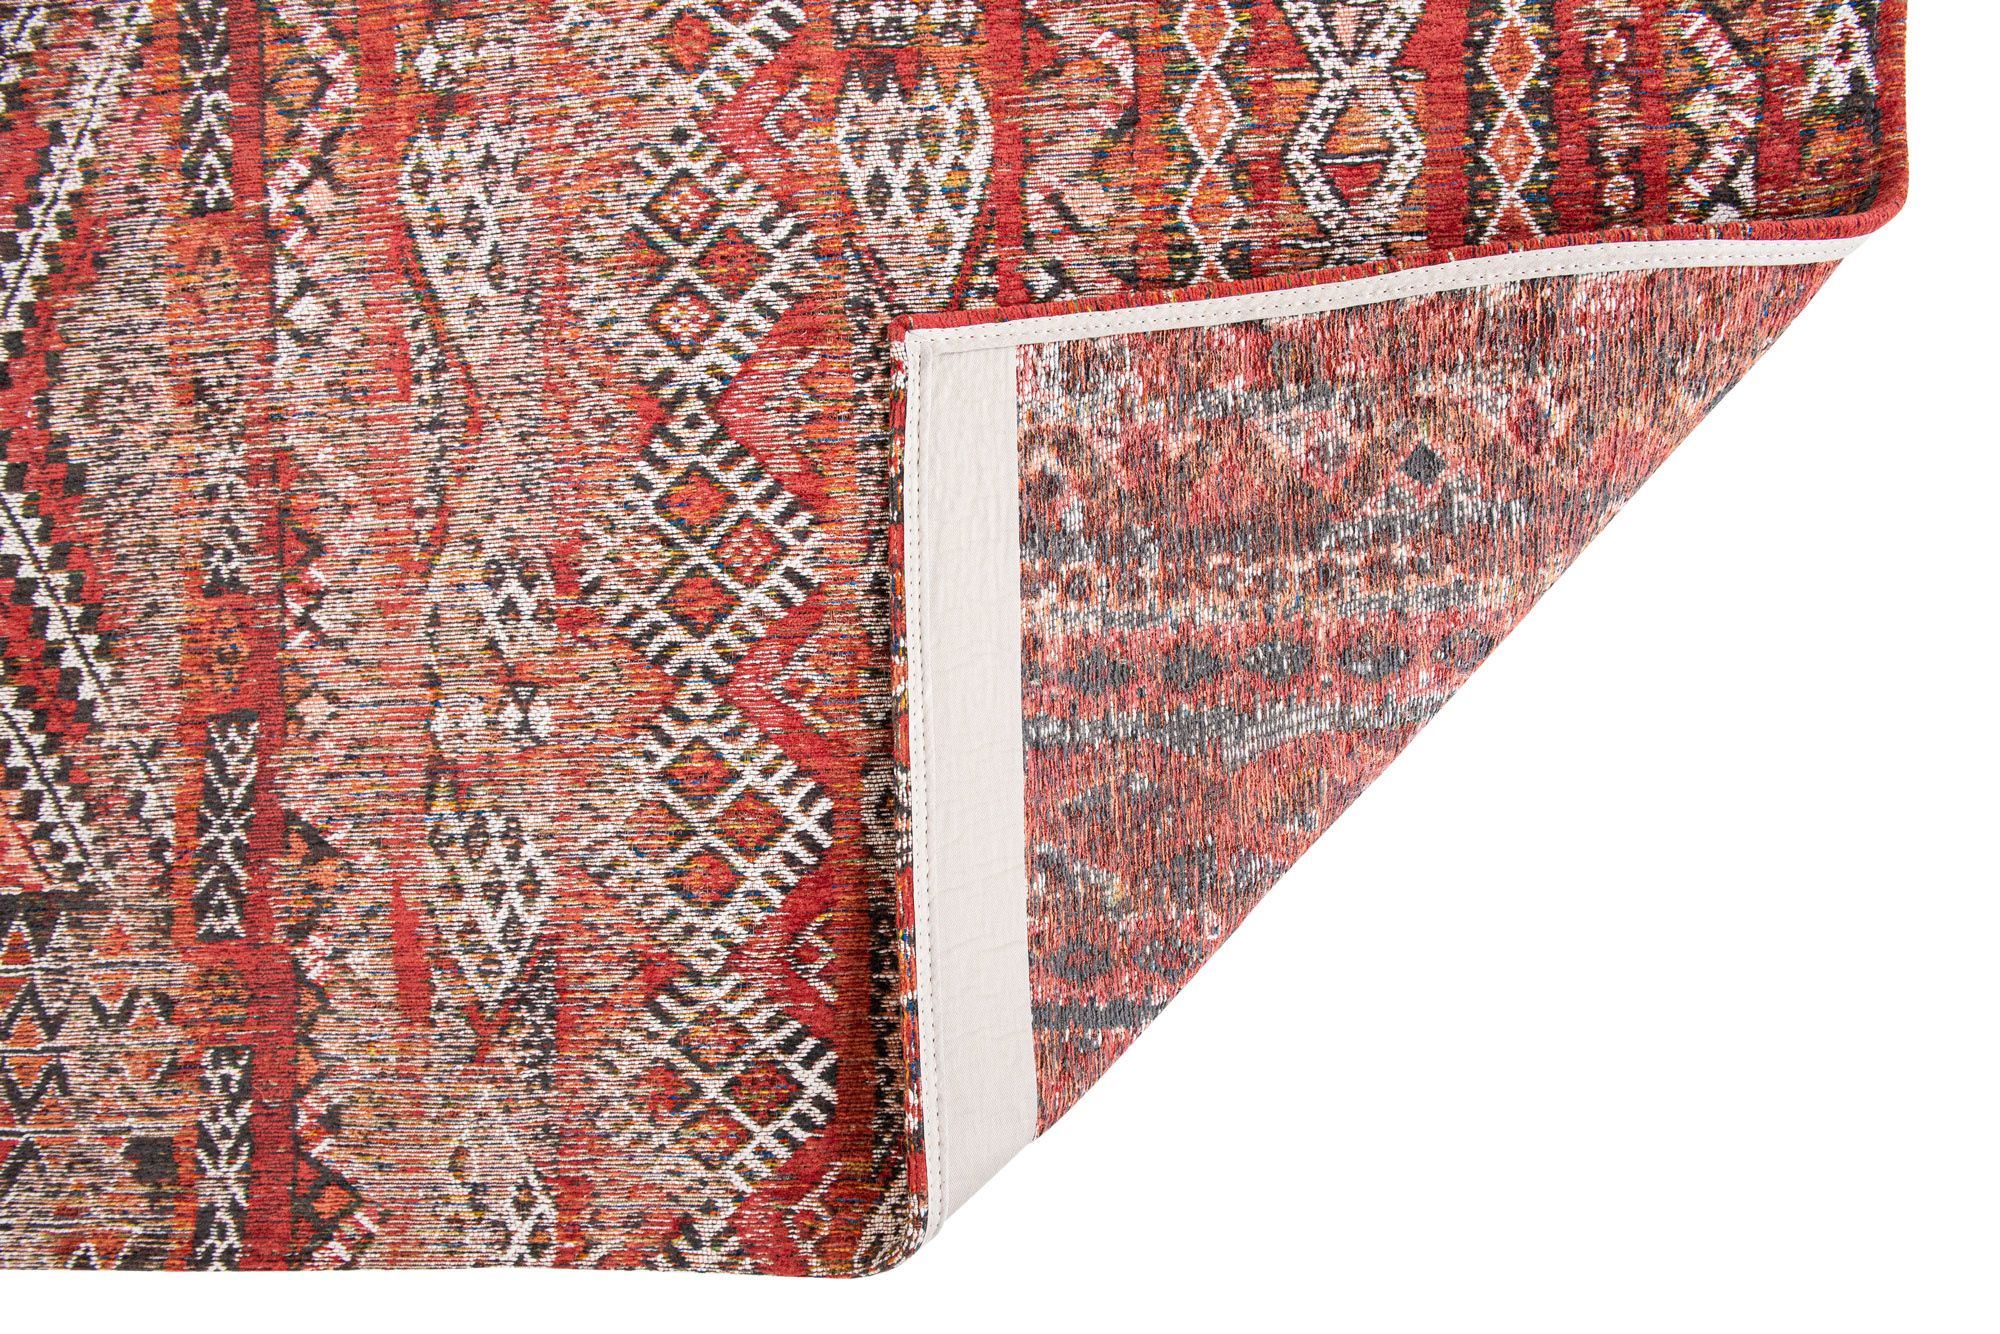 Fez Red 9115 Rug ☞ Size: 200 x 280 cm